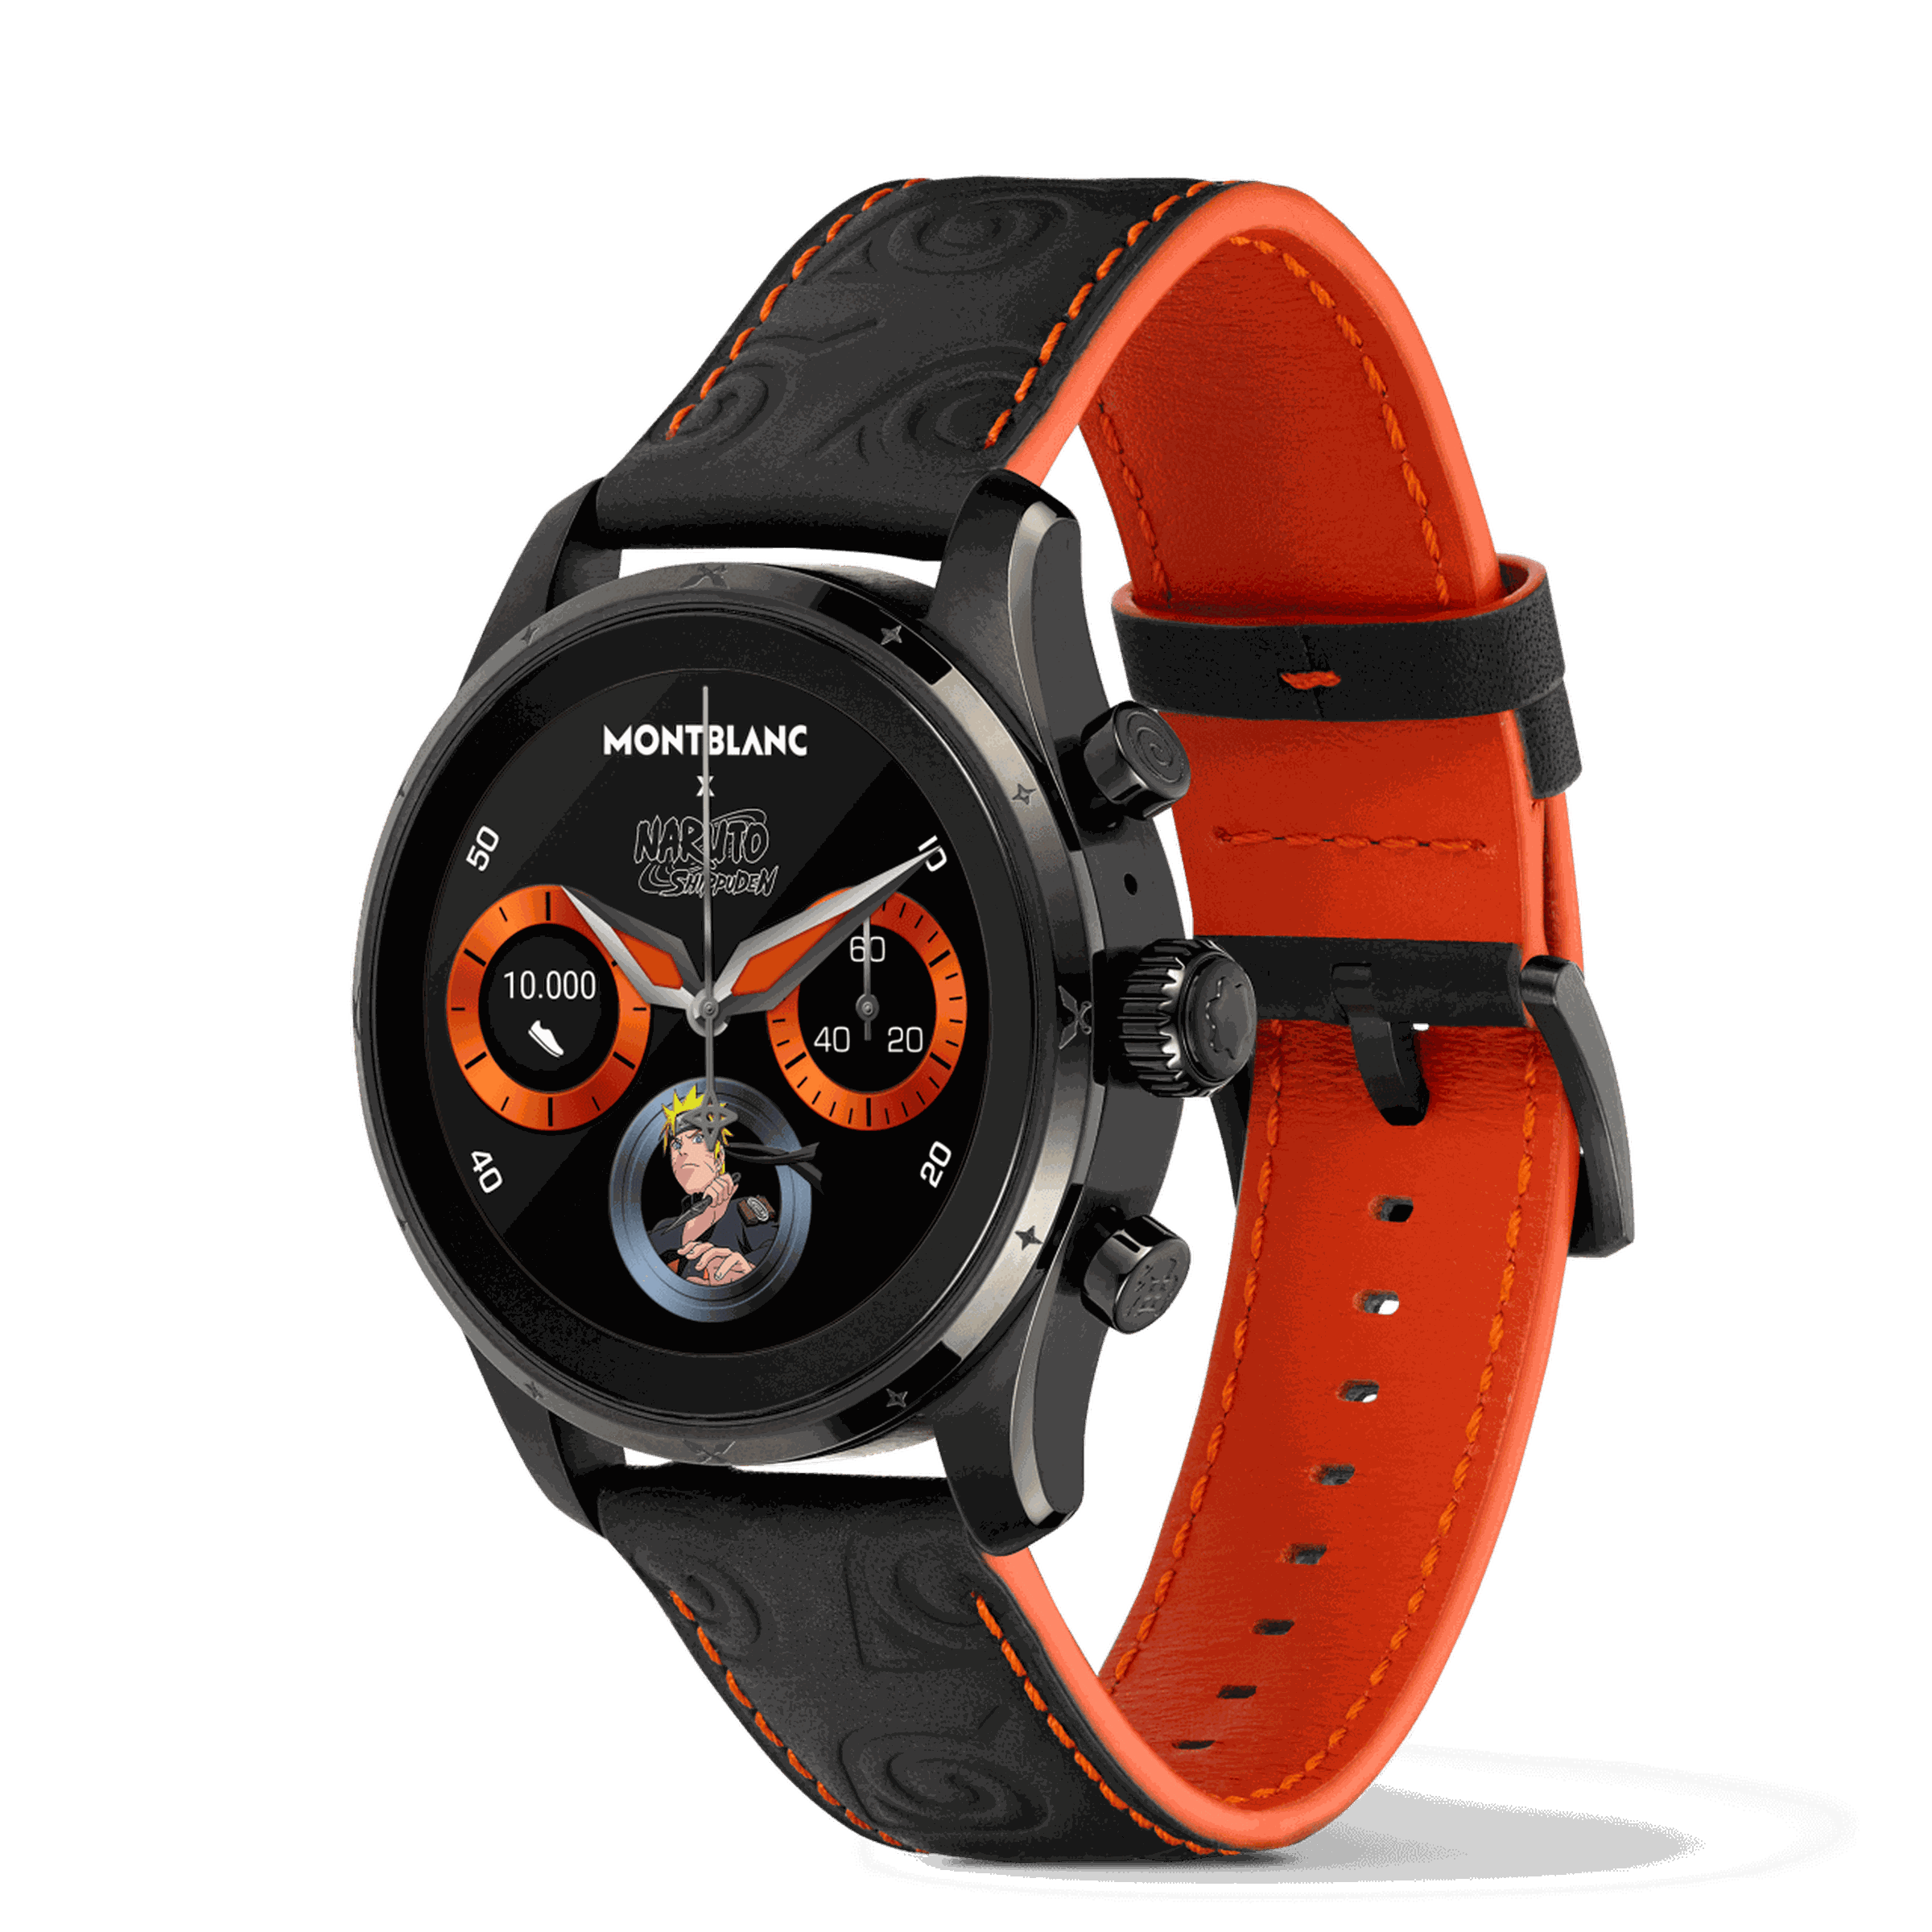 Side image of the Montblanc x Naruto smartwatch